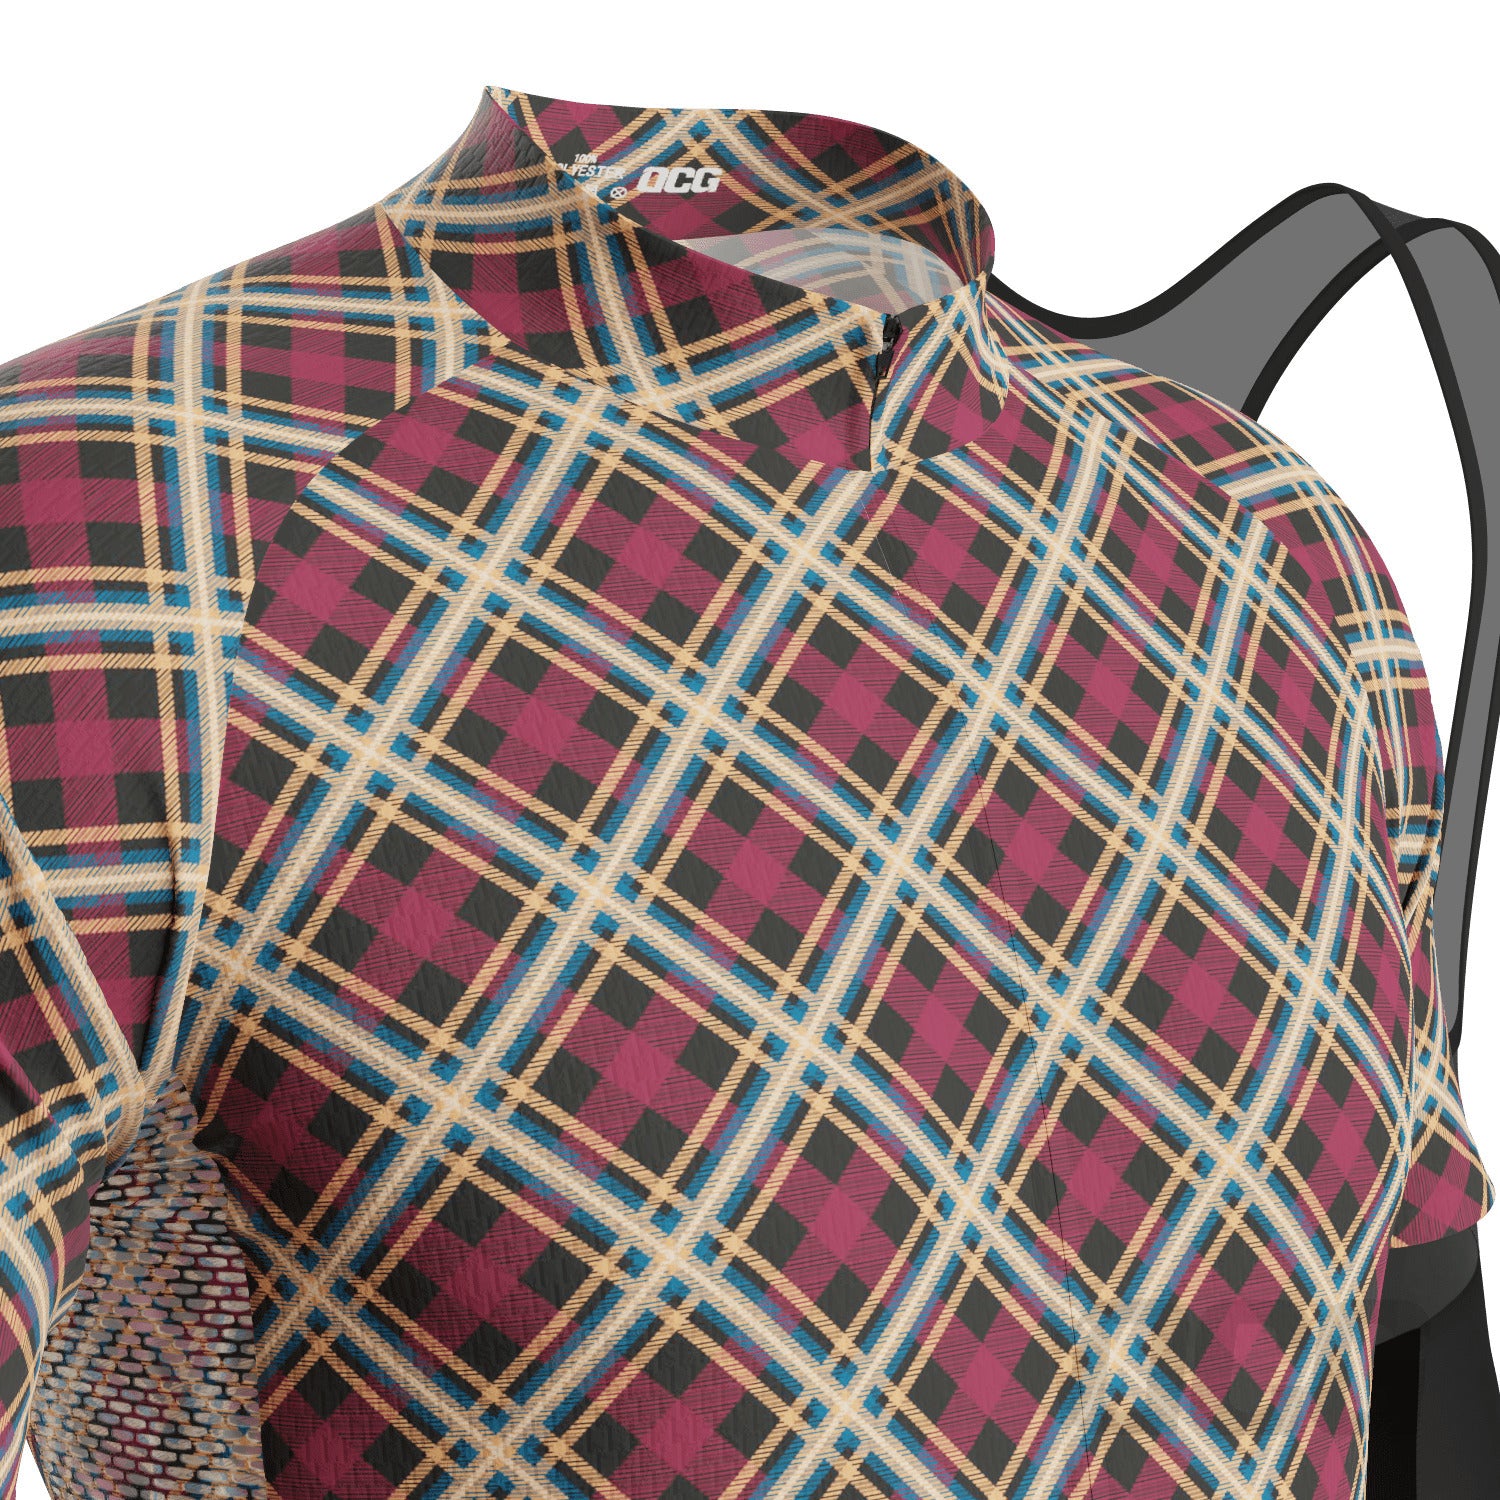 Men's Red Plaid Checkered Short Sleeve Cycling Kit